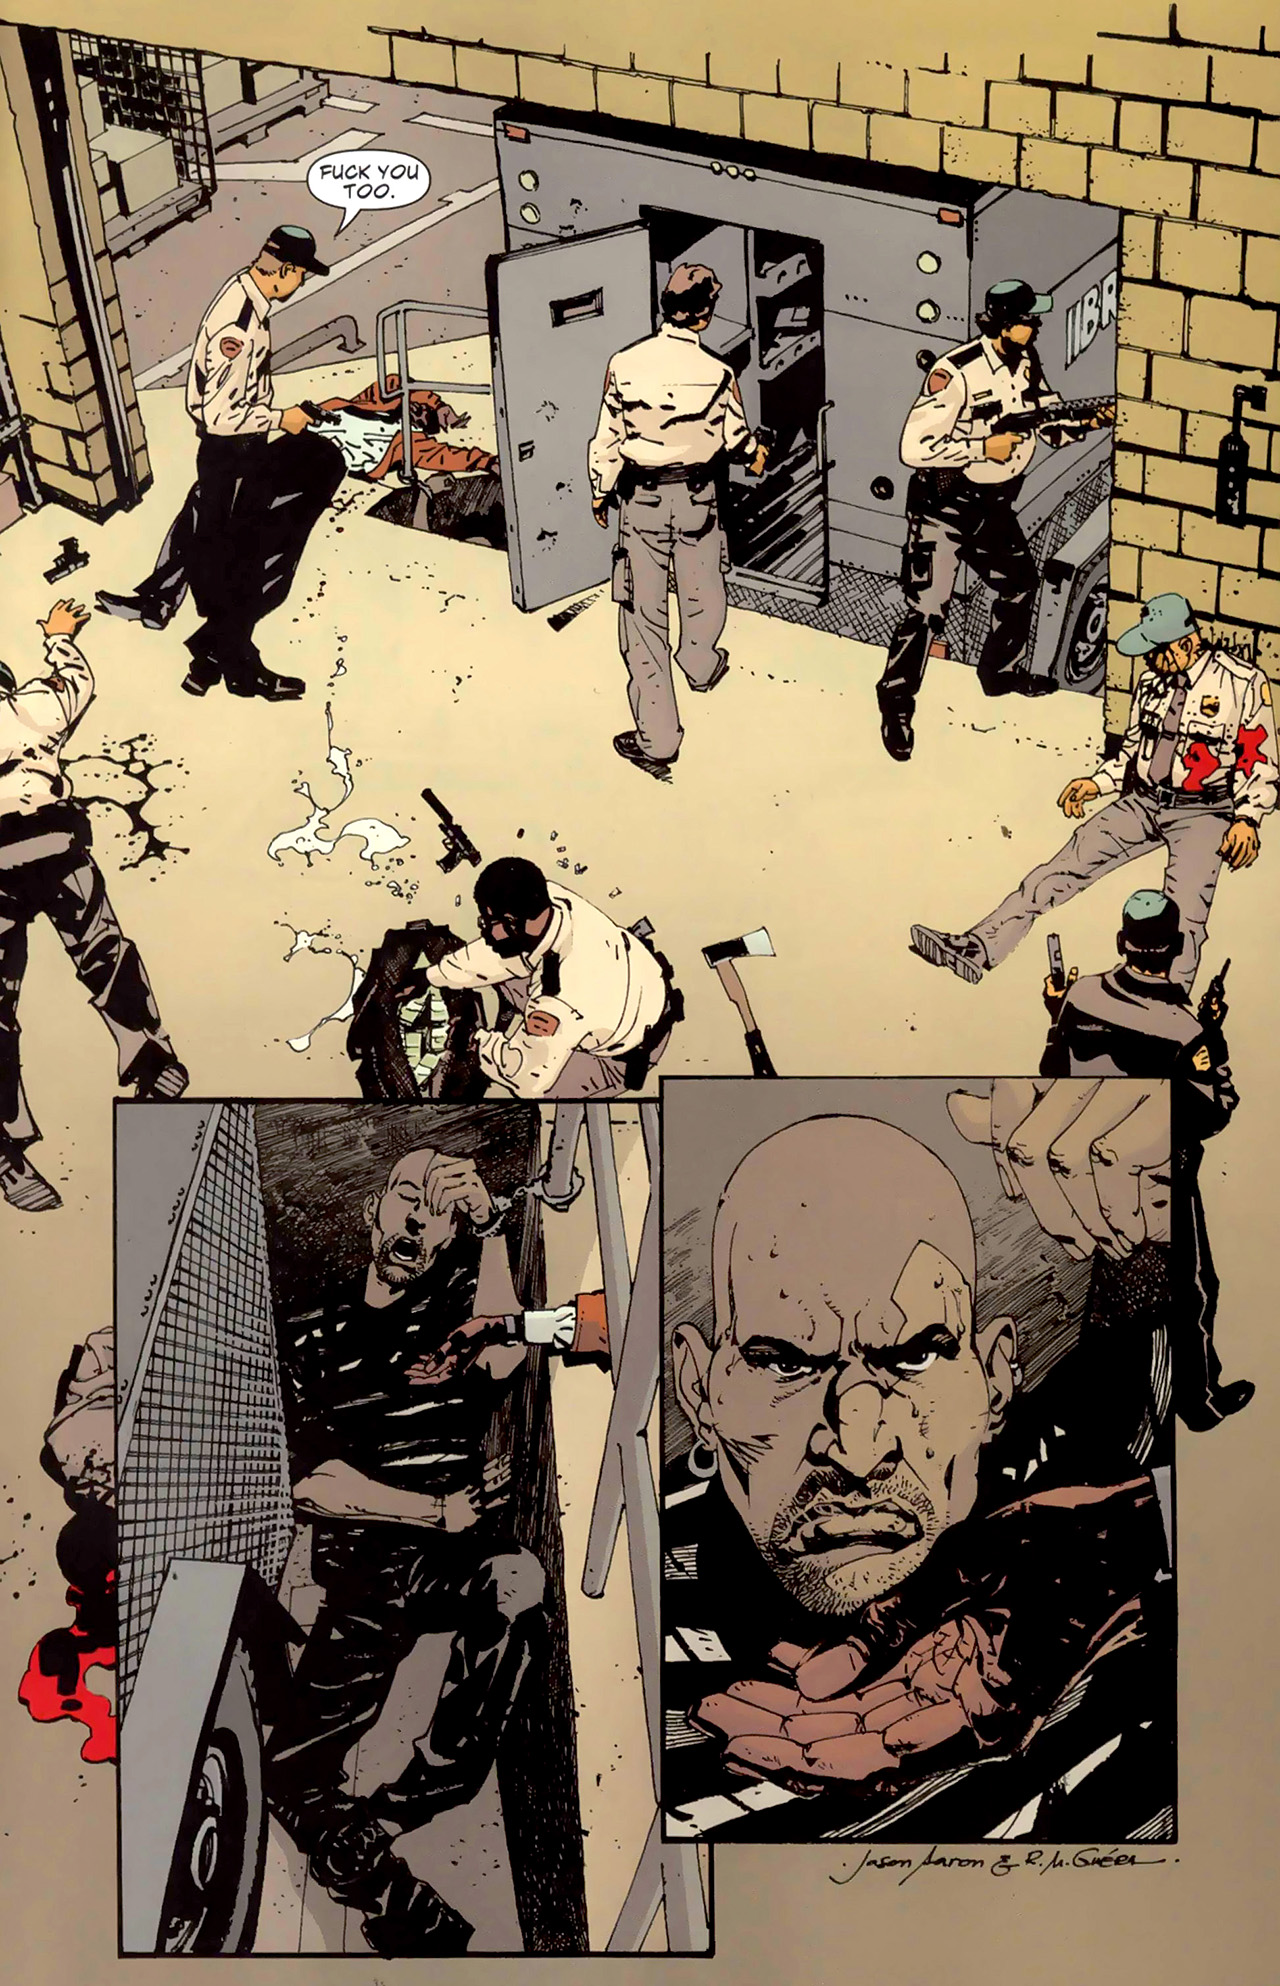 Scalped #29 - Rock Bottom, Pop. 1: High Lonesome, Conclusion